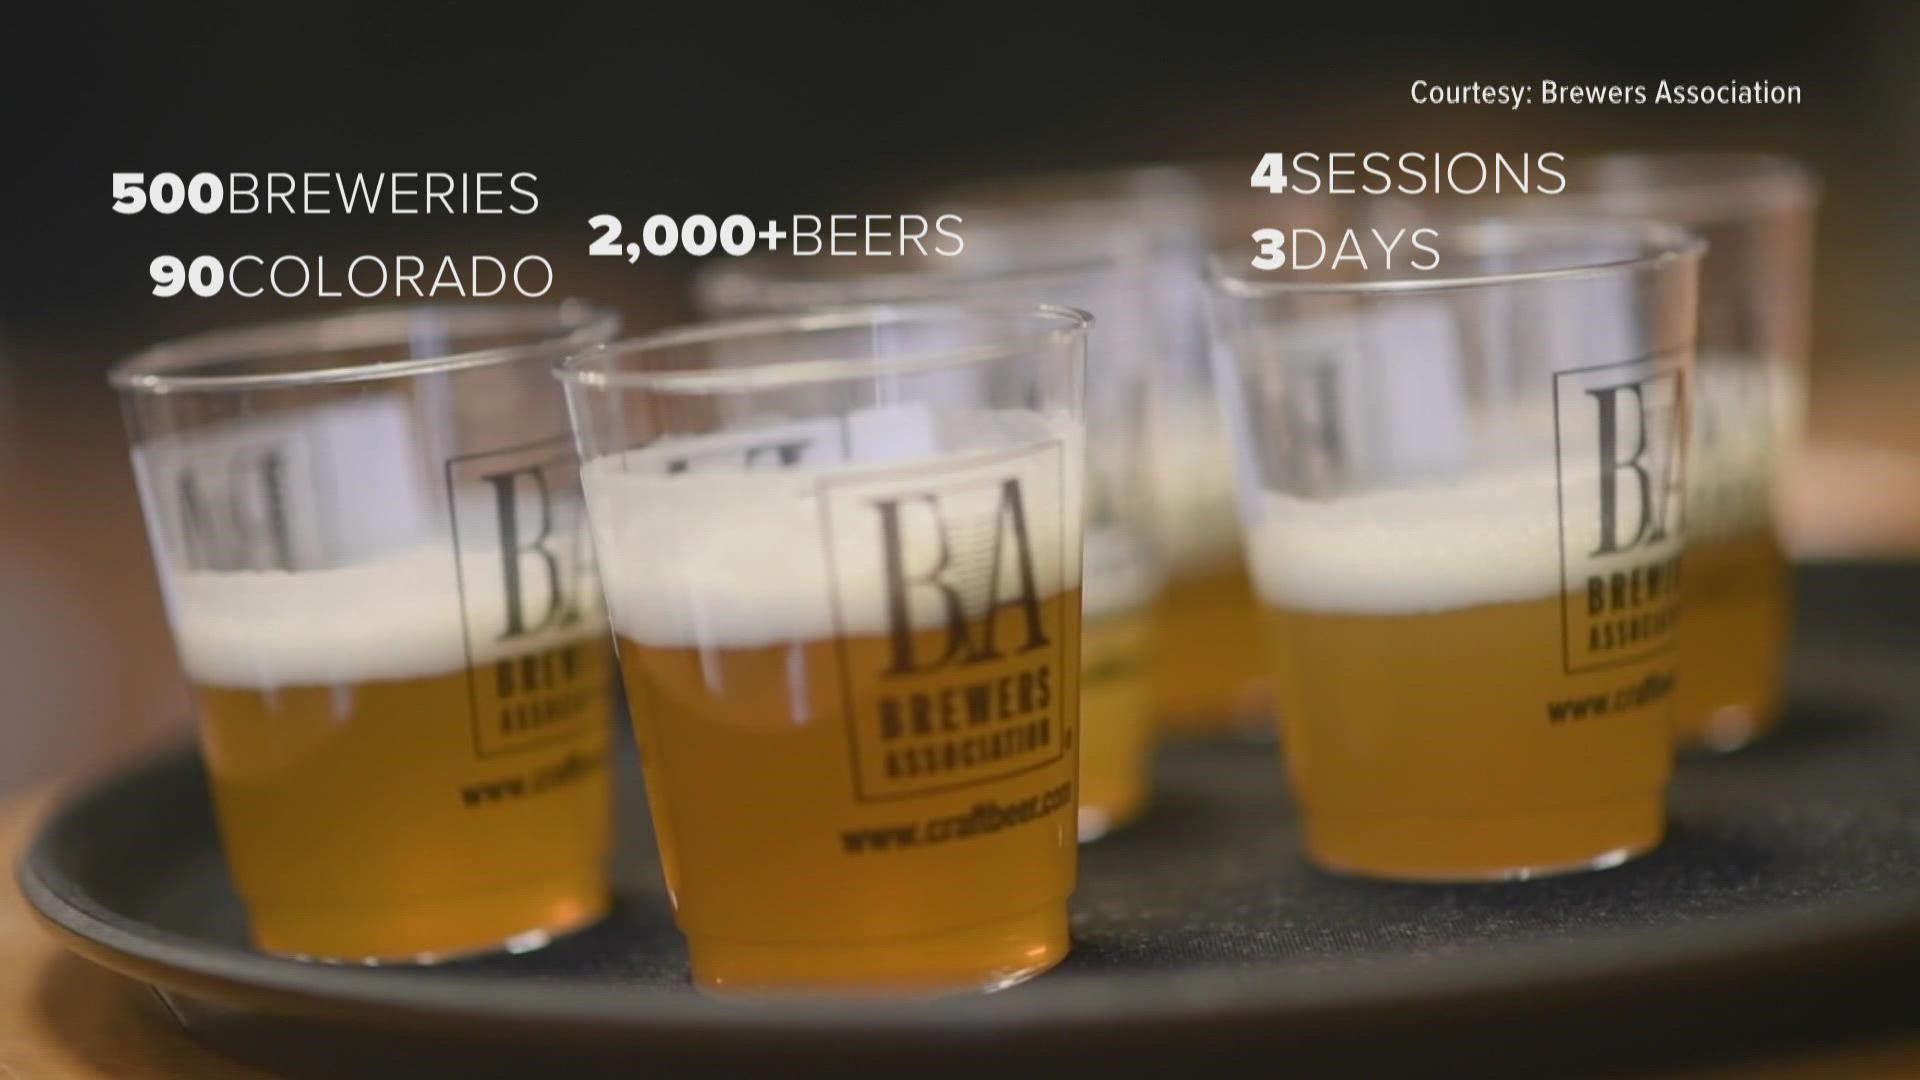 The 40th annual Great American Beer Festival starts on October 6 and runs until October 8 at the Colorado Convention Center.